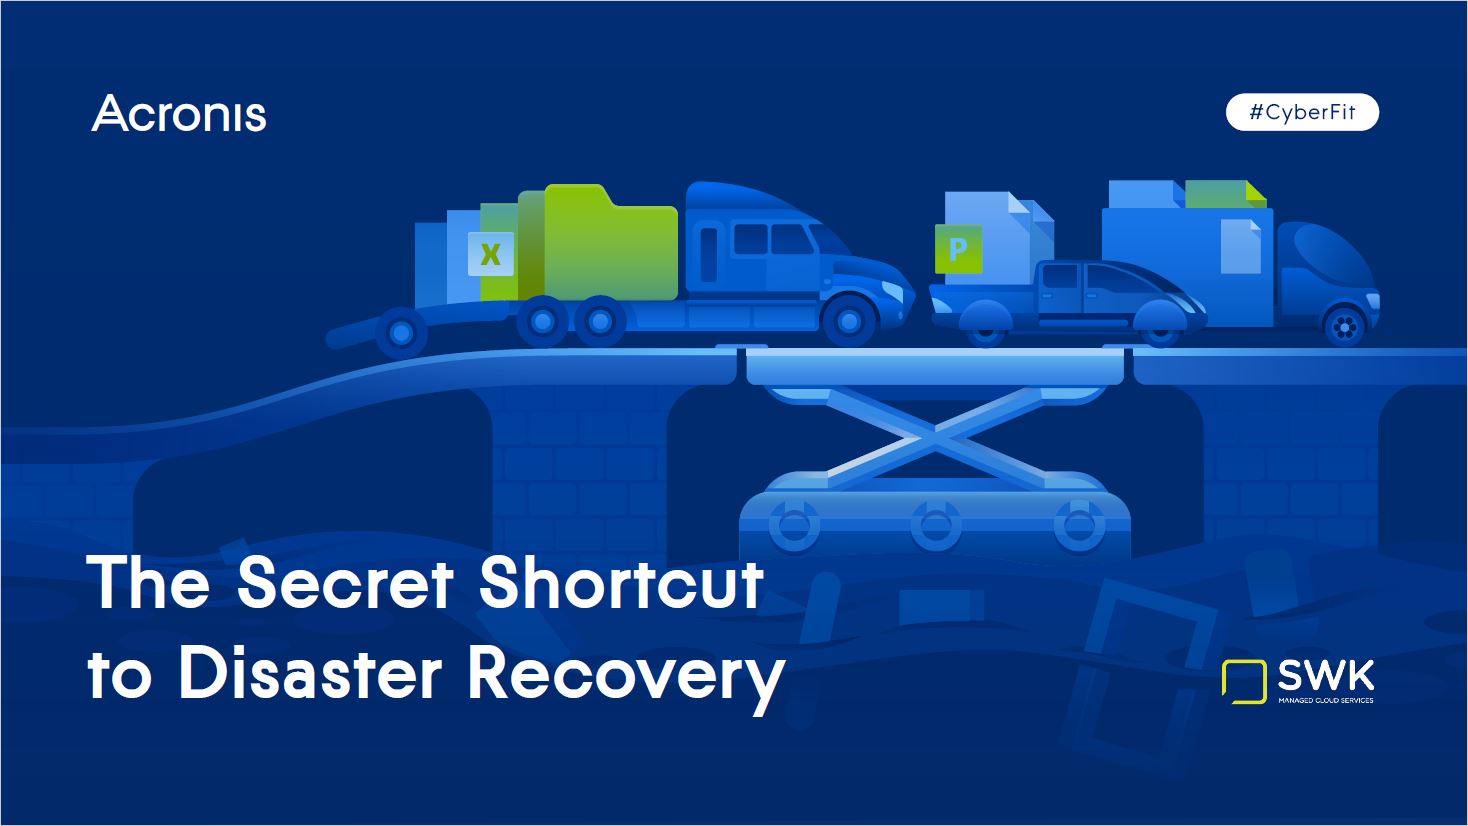 shortcut business continuity and disaster recovery ebook acronis SWK